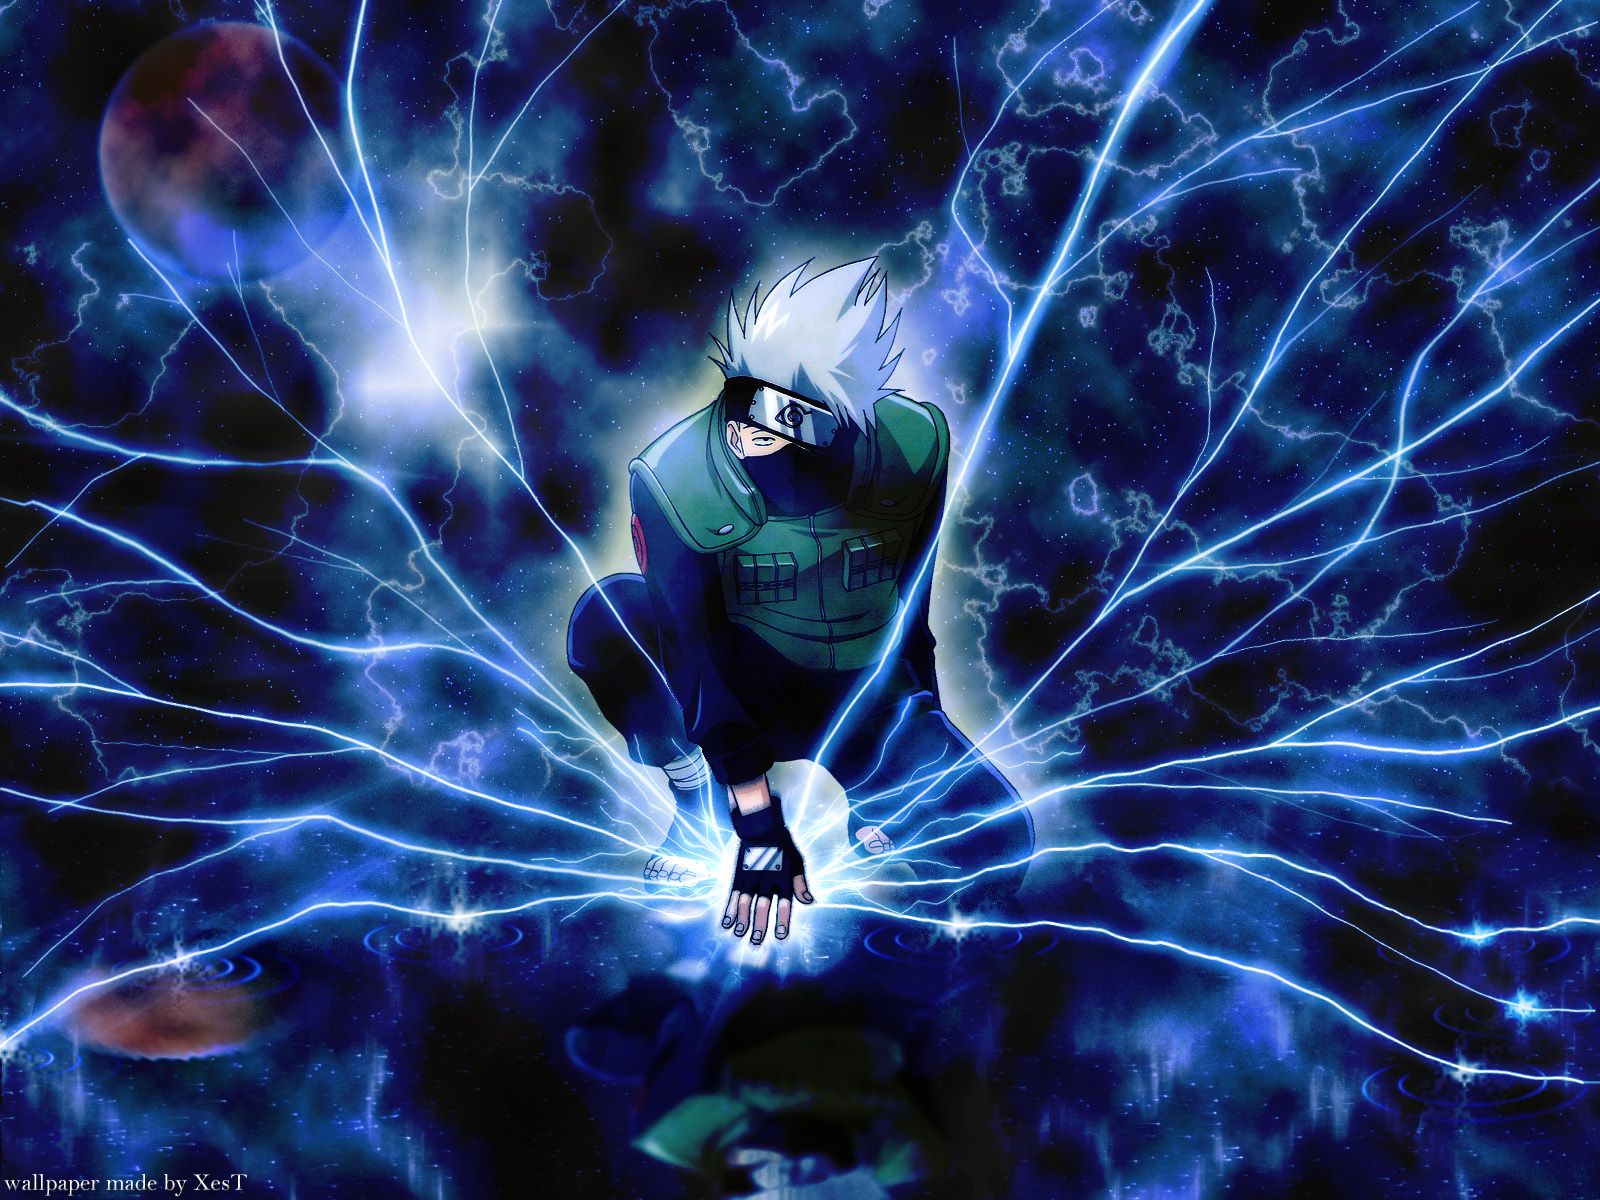 2. Naruto with blue hair fanart - wide 3